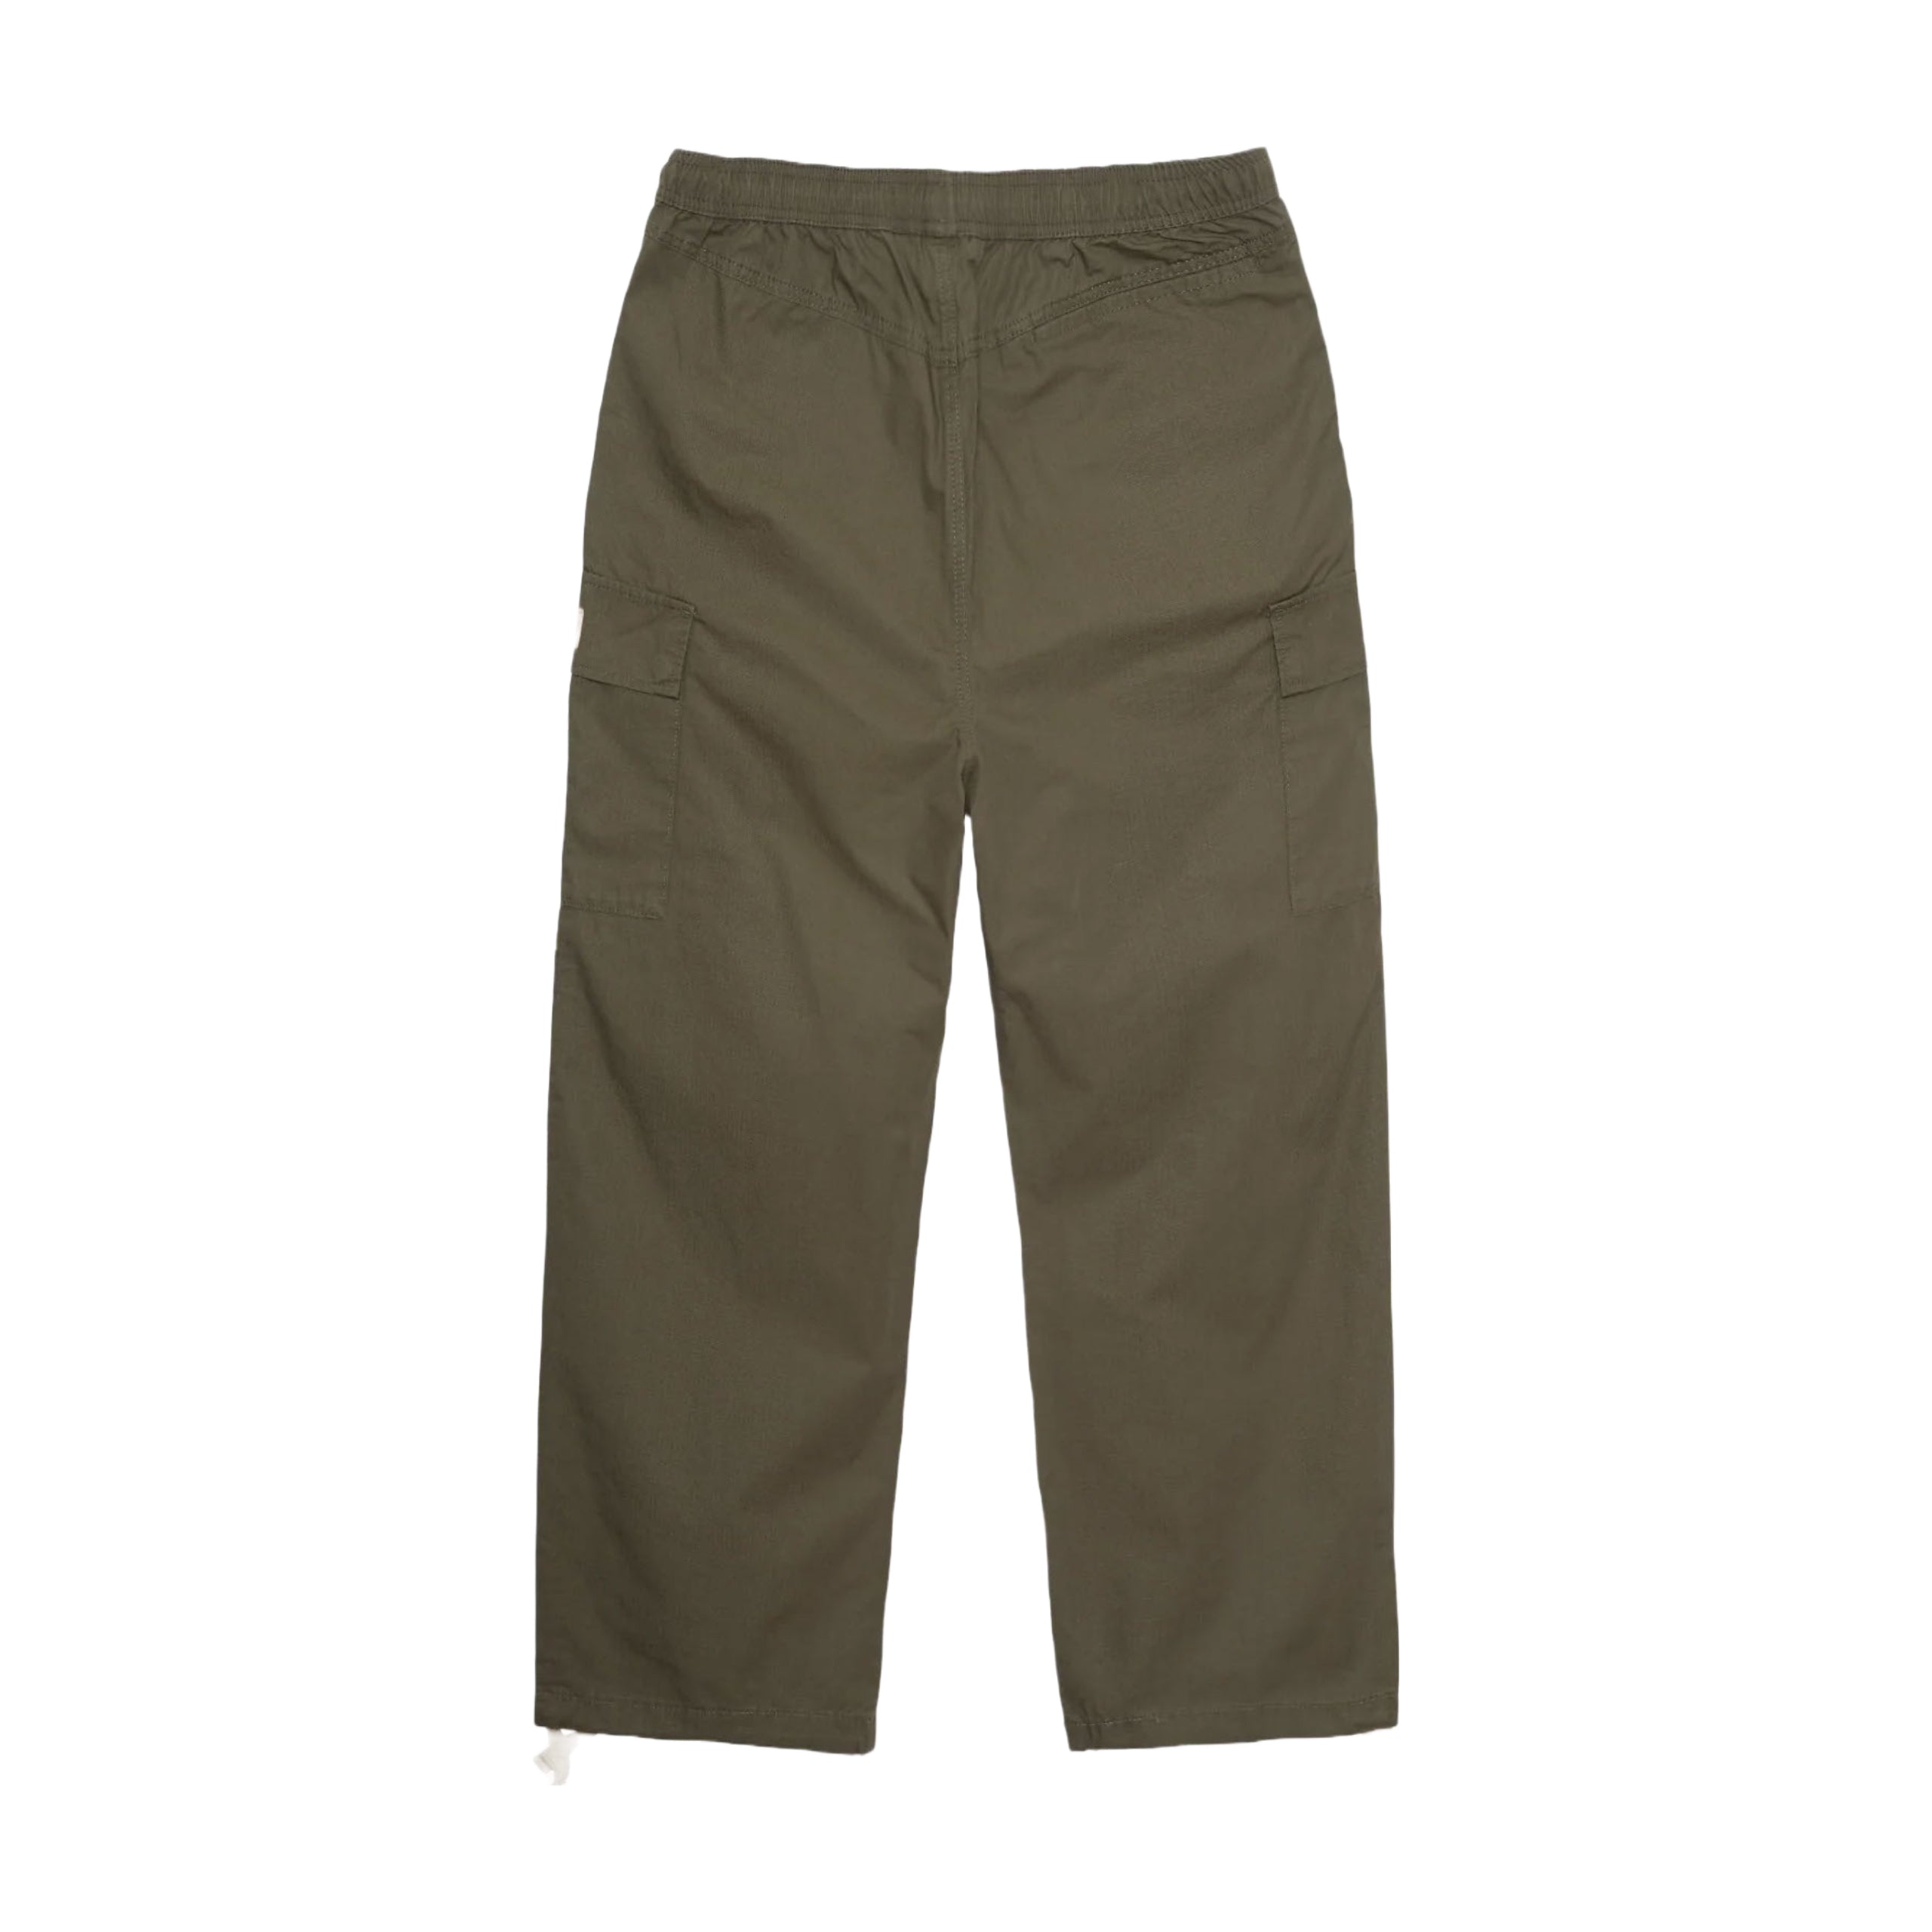 Stussy Ripstop Cargo Beach Pant - Olive - S / Green